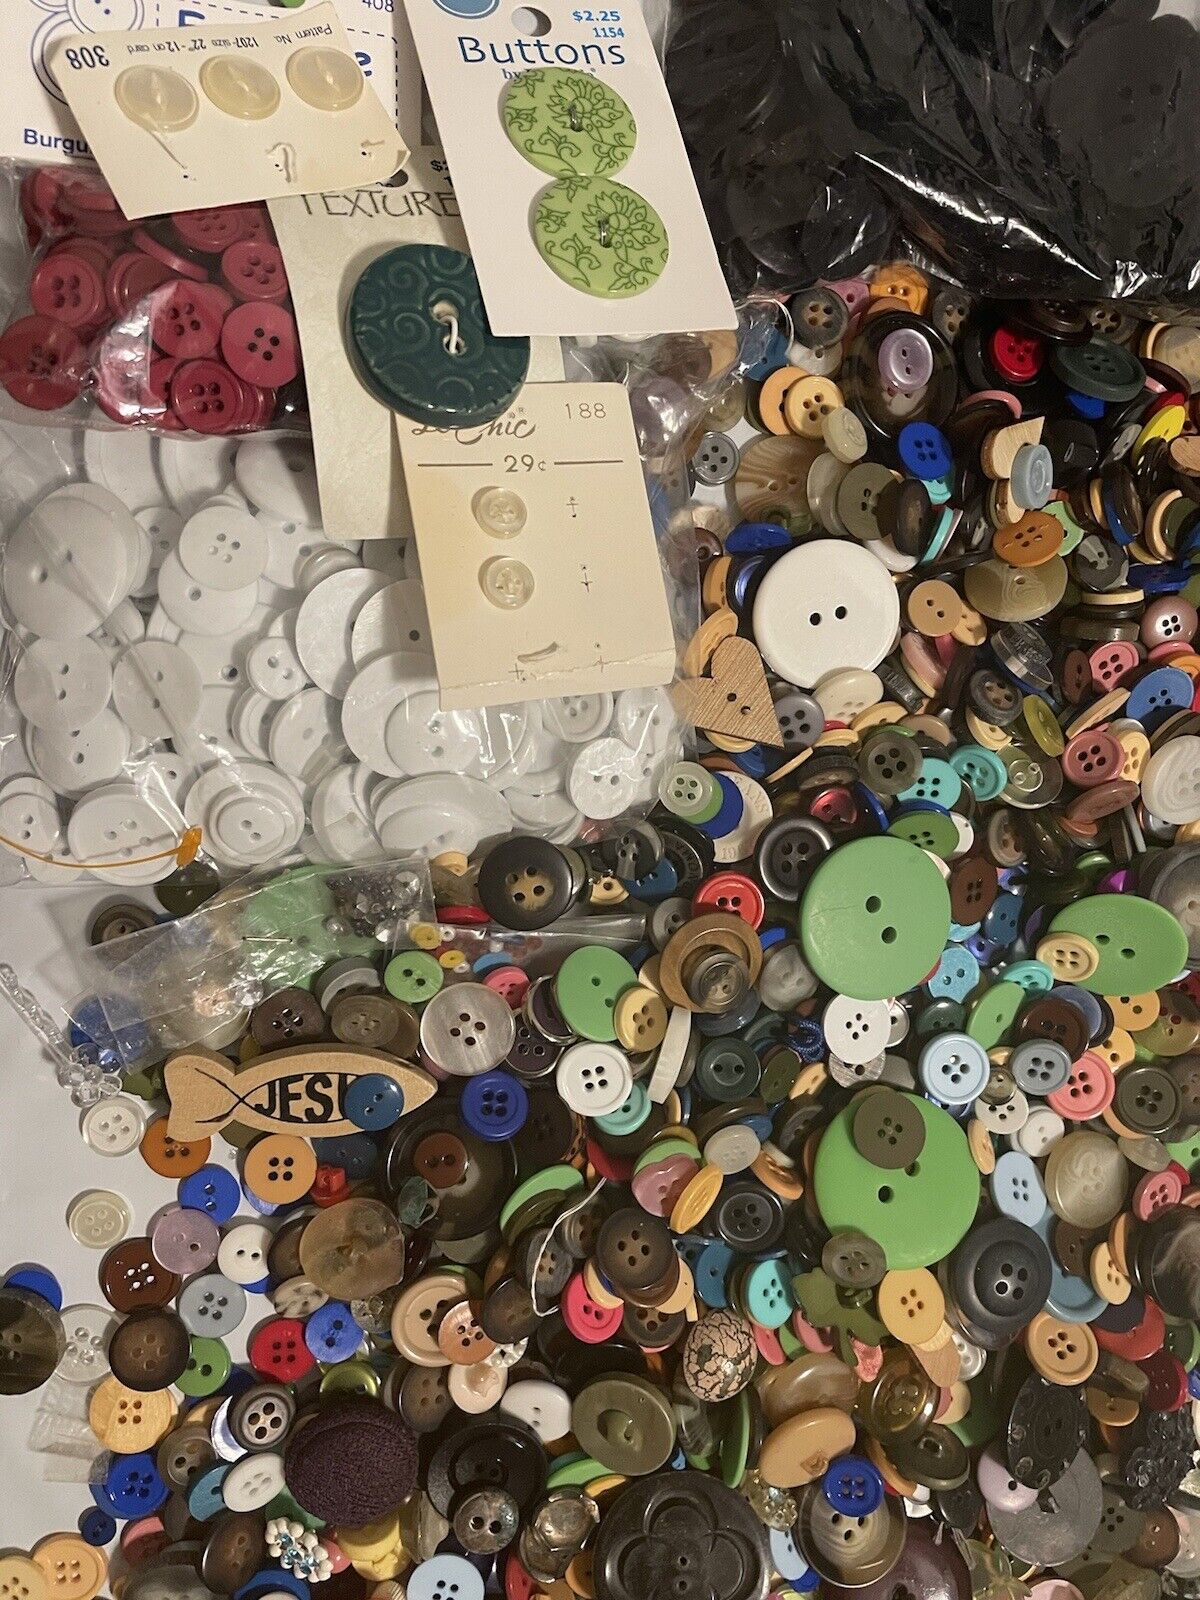 BUTTONS 2.98 lbs pounds Random Sizes Ages Shapes Craft Sewing Art New & Used